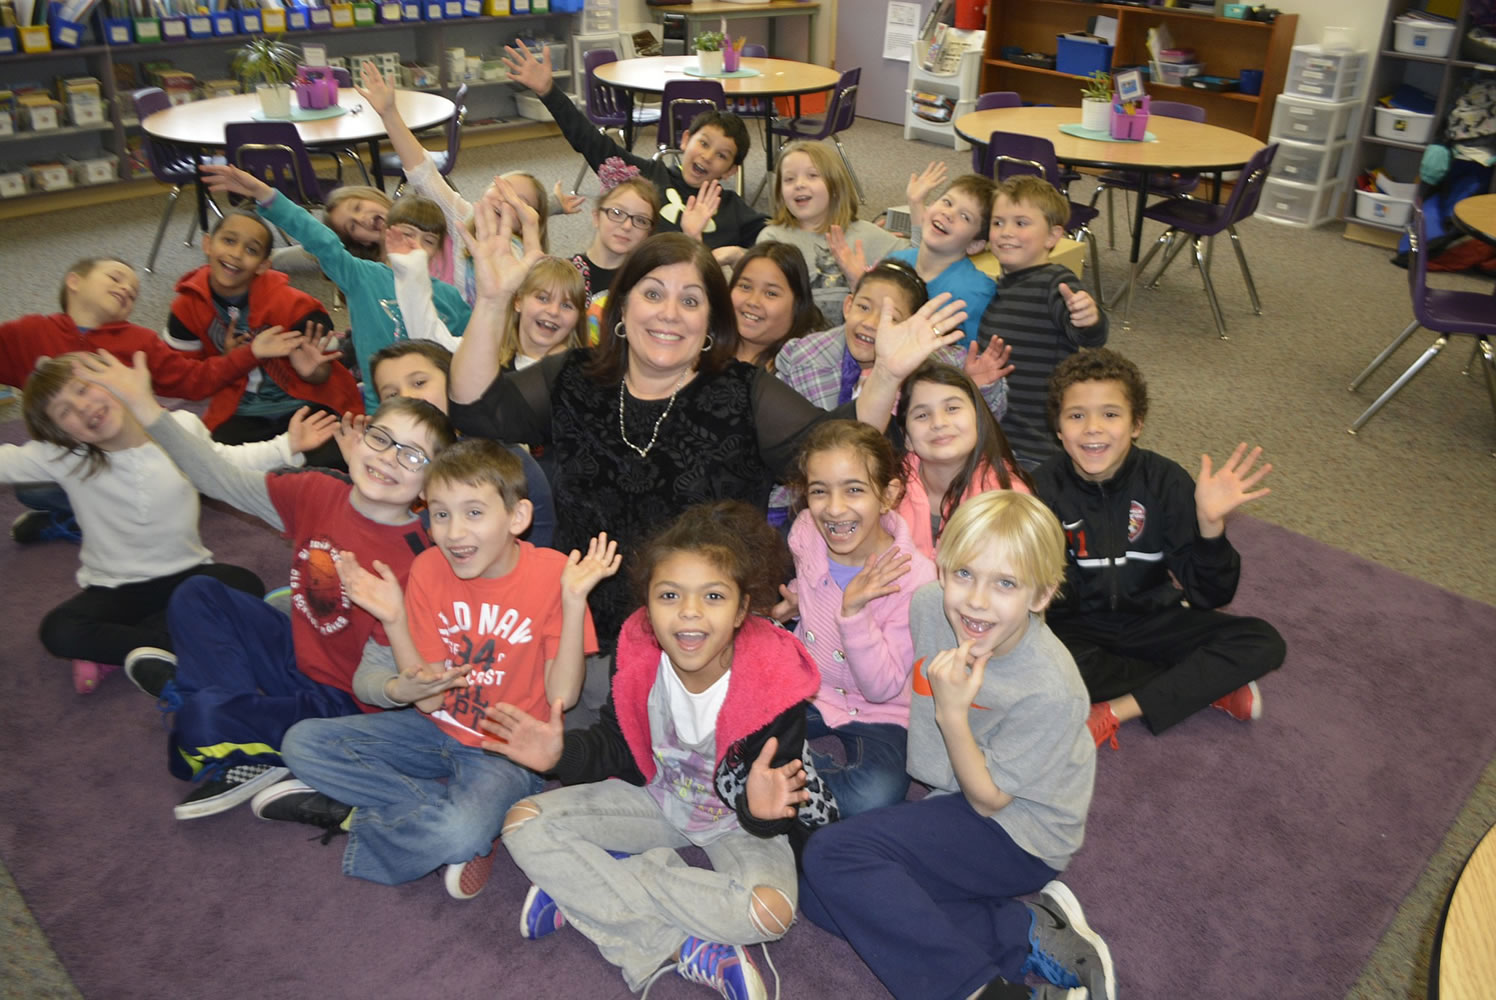 Washougal: Hathaway Elementary School Principal Laura Bolt announced she will retire at the end of the school year, ending a 42-year career in education.